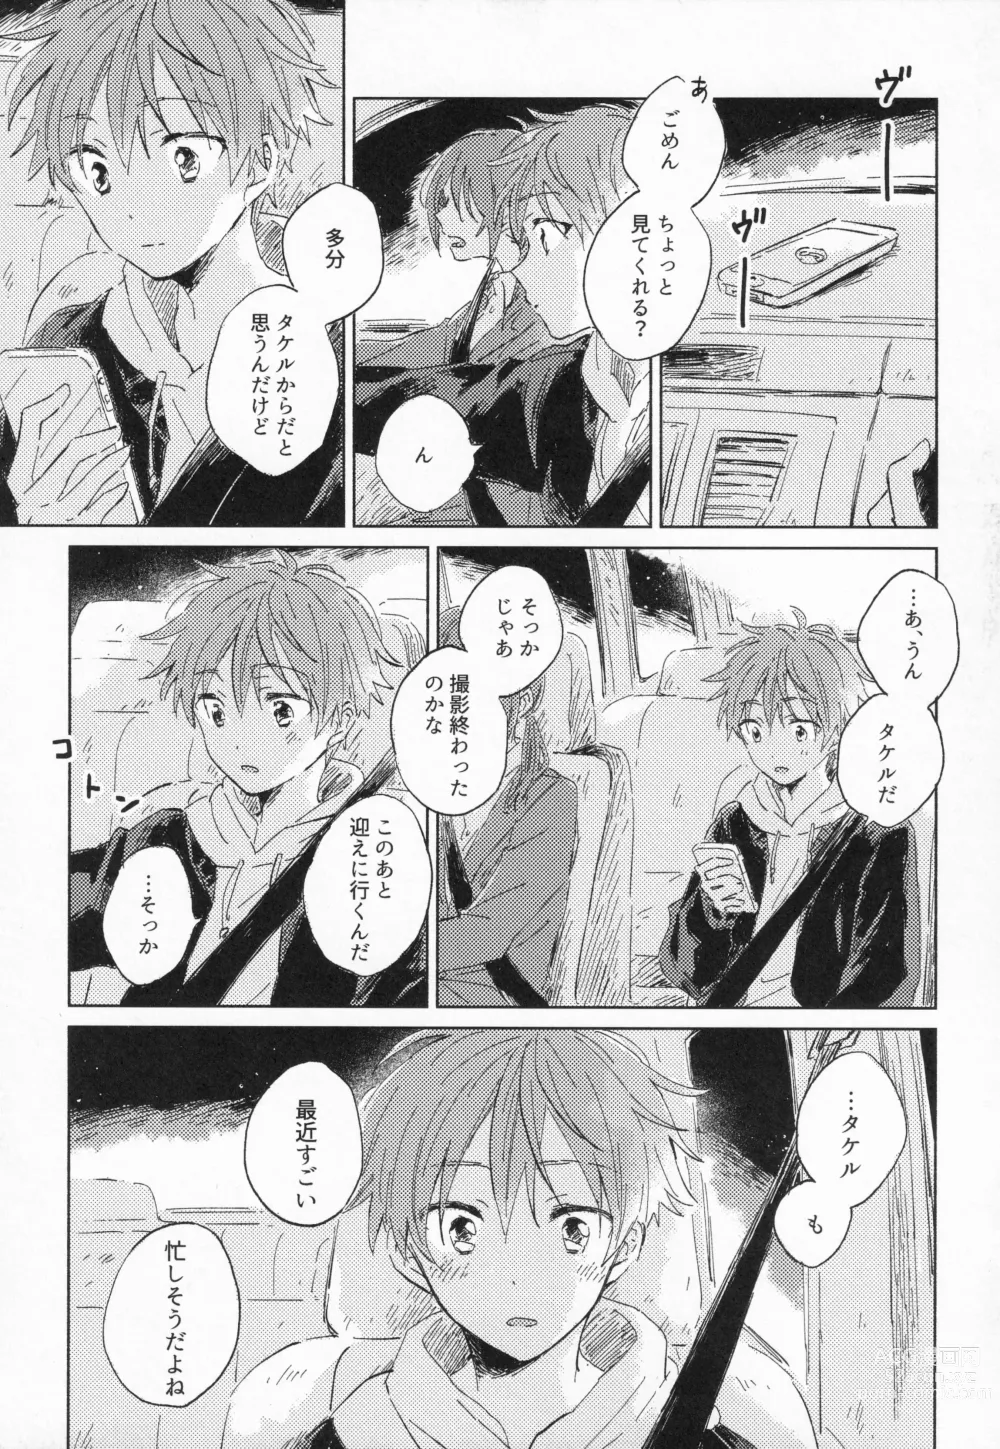 Page 8 of doujinshi 21-ji ni Machiawase - On the stroke of 9pm, the spell will be broken